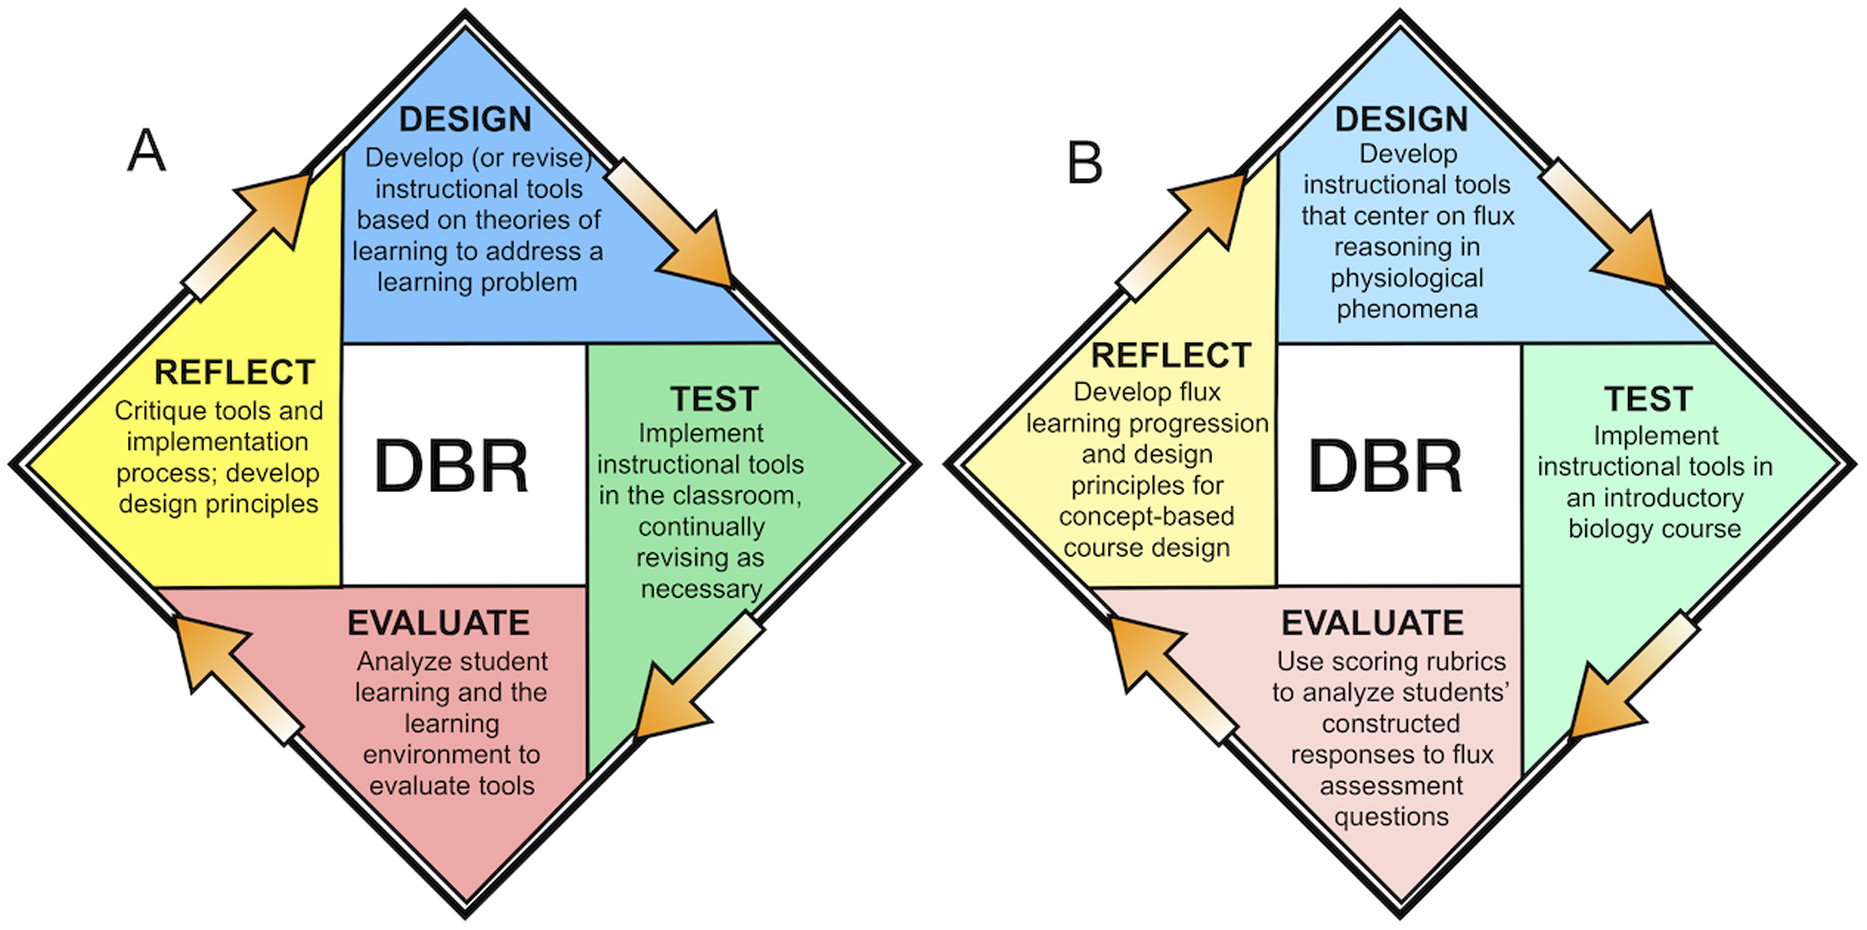 using design based research in higher education innovation